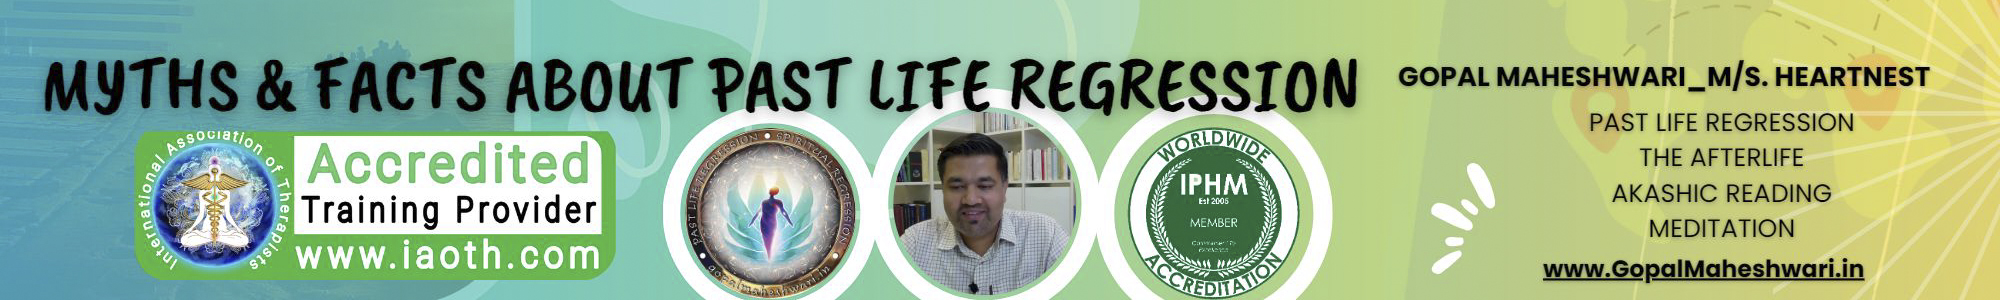 Myths & Facts about Past Life Regression by an expert trainer Gopal MAheshwari